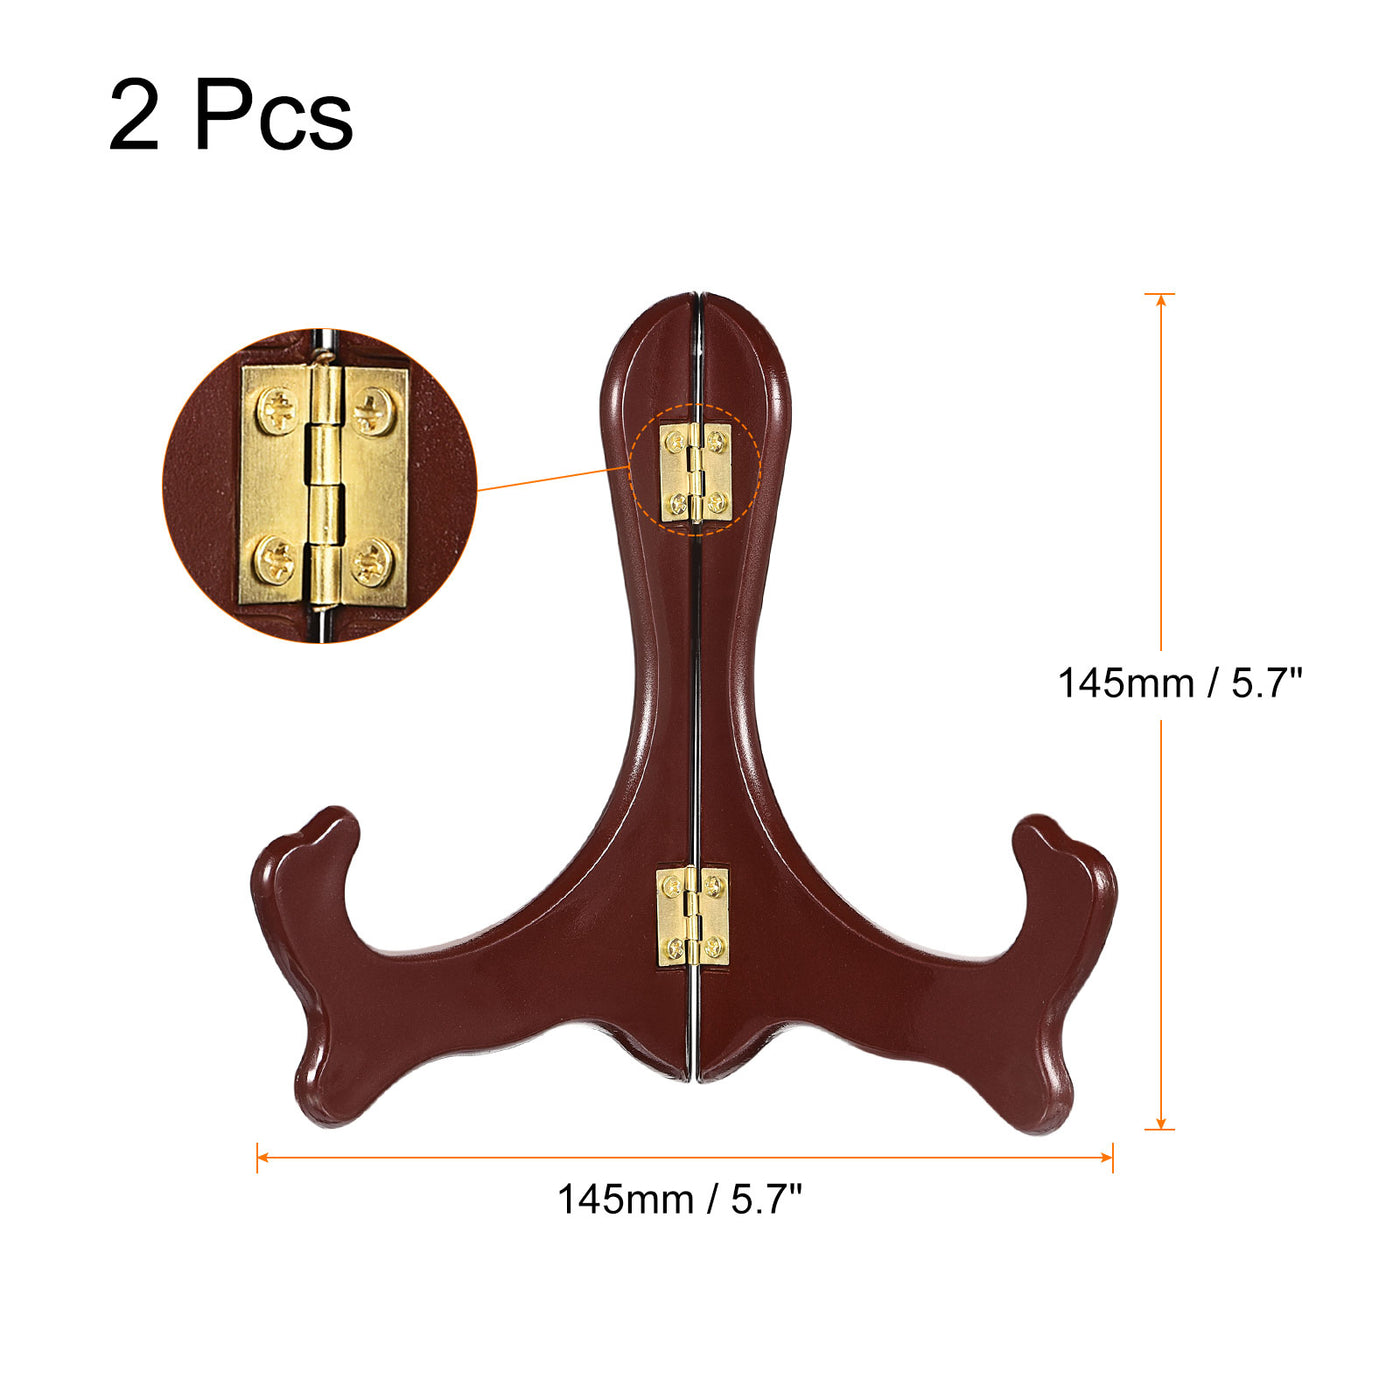 uxcell Uxcell 2pcs 5.7" Easel Plate Holder, Wood-like Plastic Folding Display Stand Brown for Decorative Picture Frame